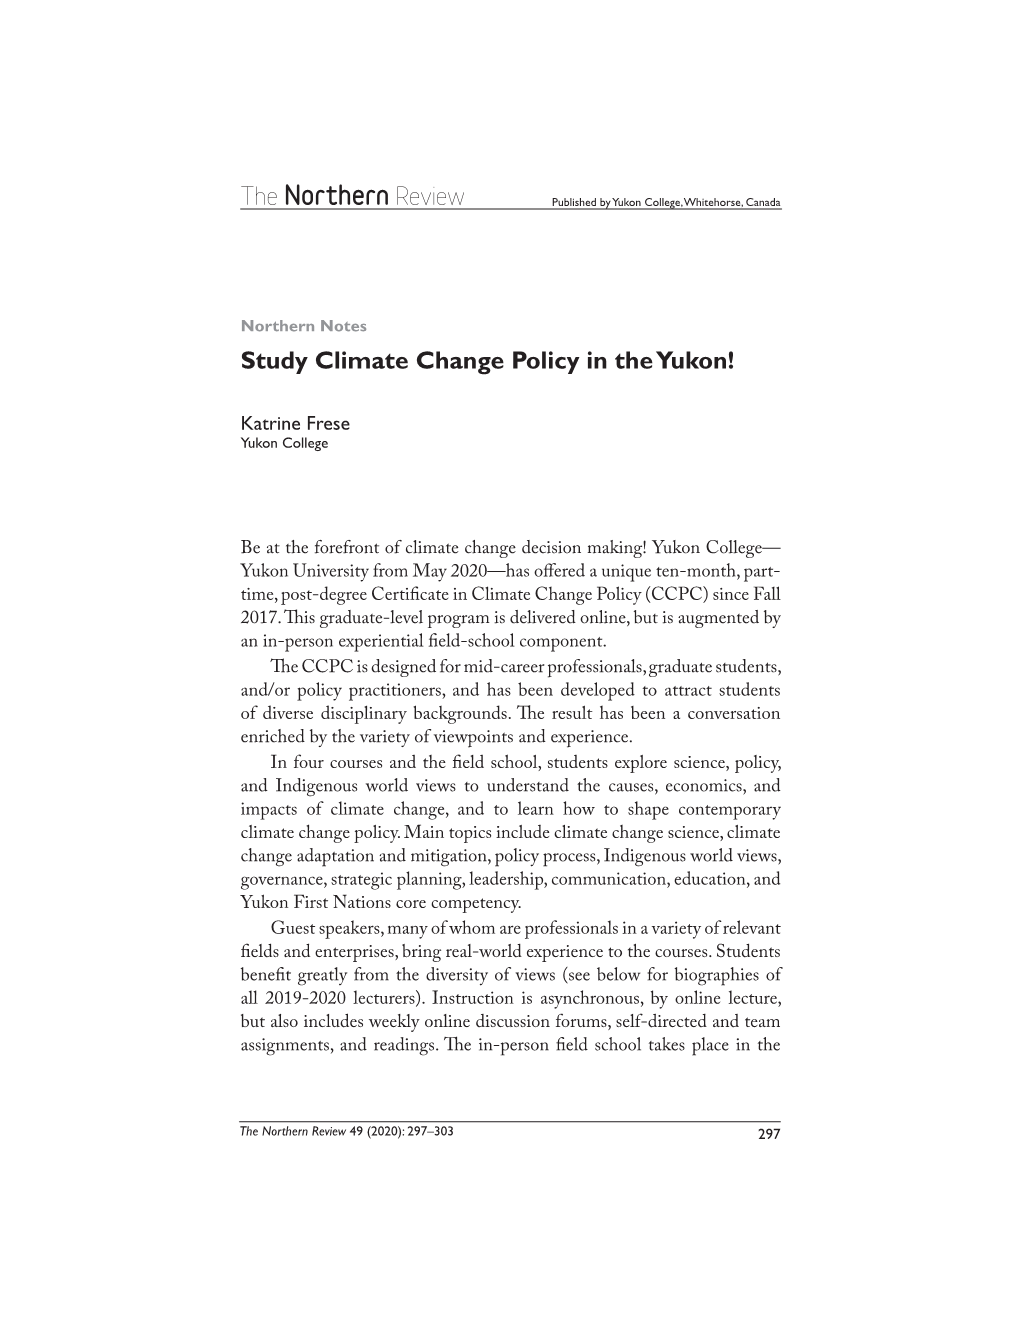 Study Climate Change Policy in the Yukon!